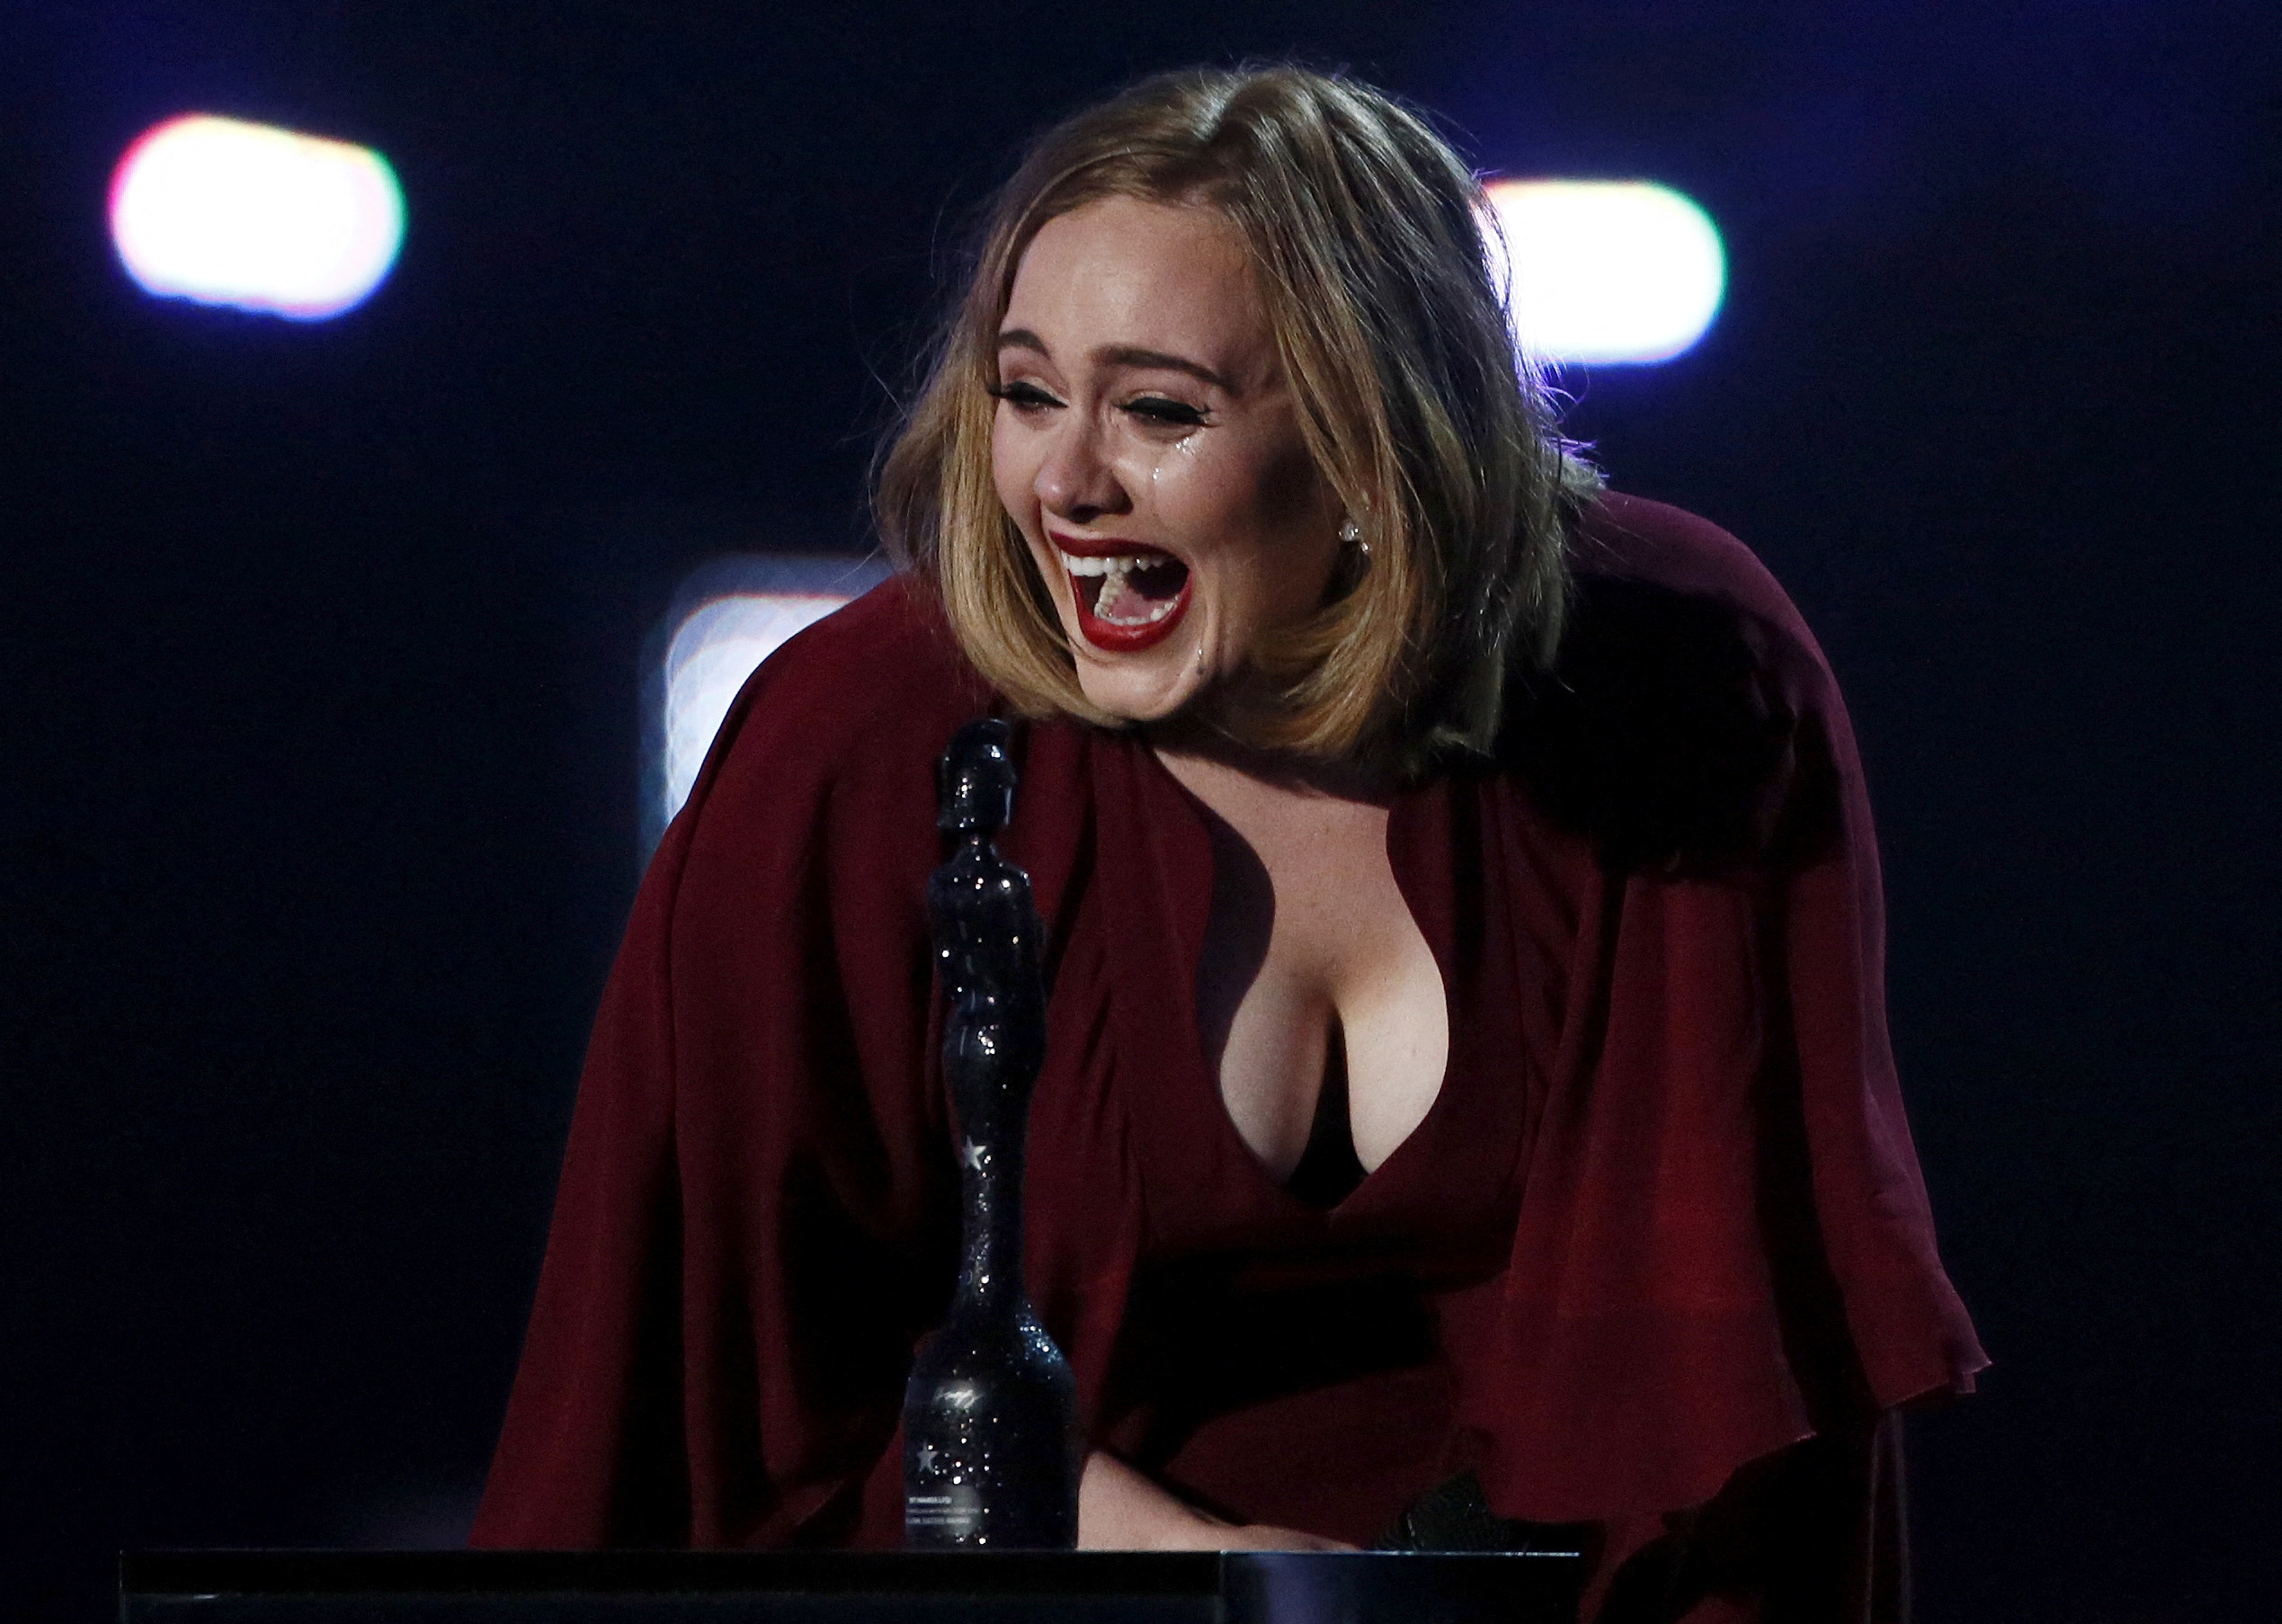 Adele reacts as she accepts the global success award at the BRIT Awards at the O2 arena in London, February 24, 2016. REUTERS/Stefan Wermuth